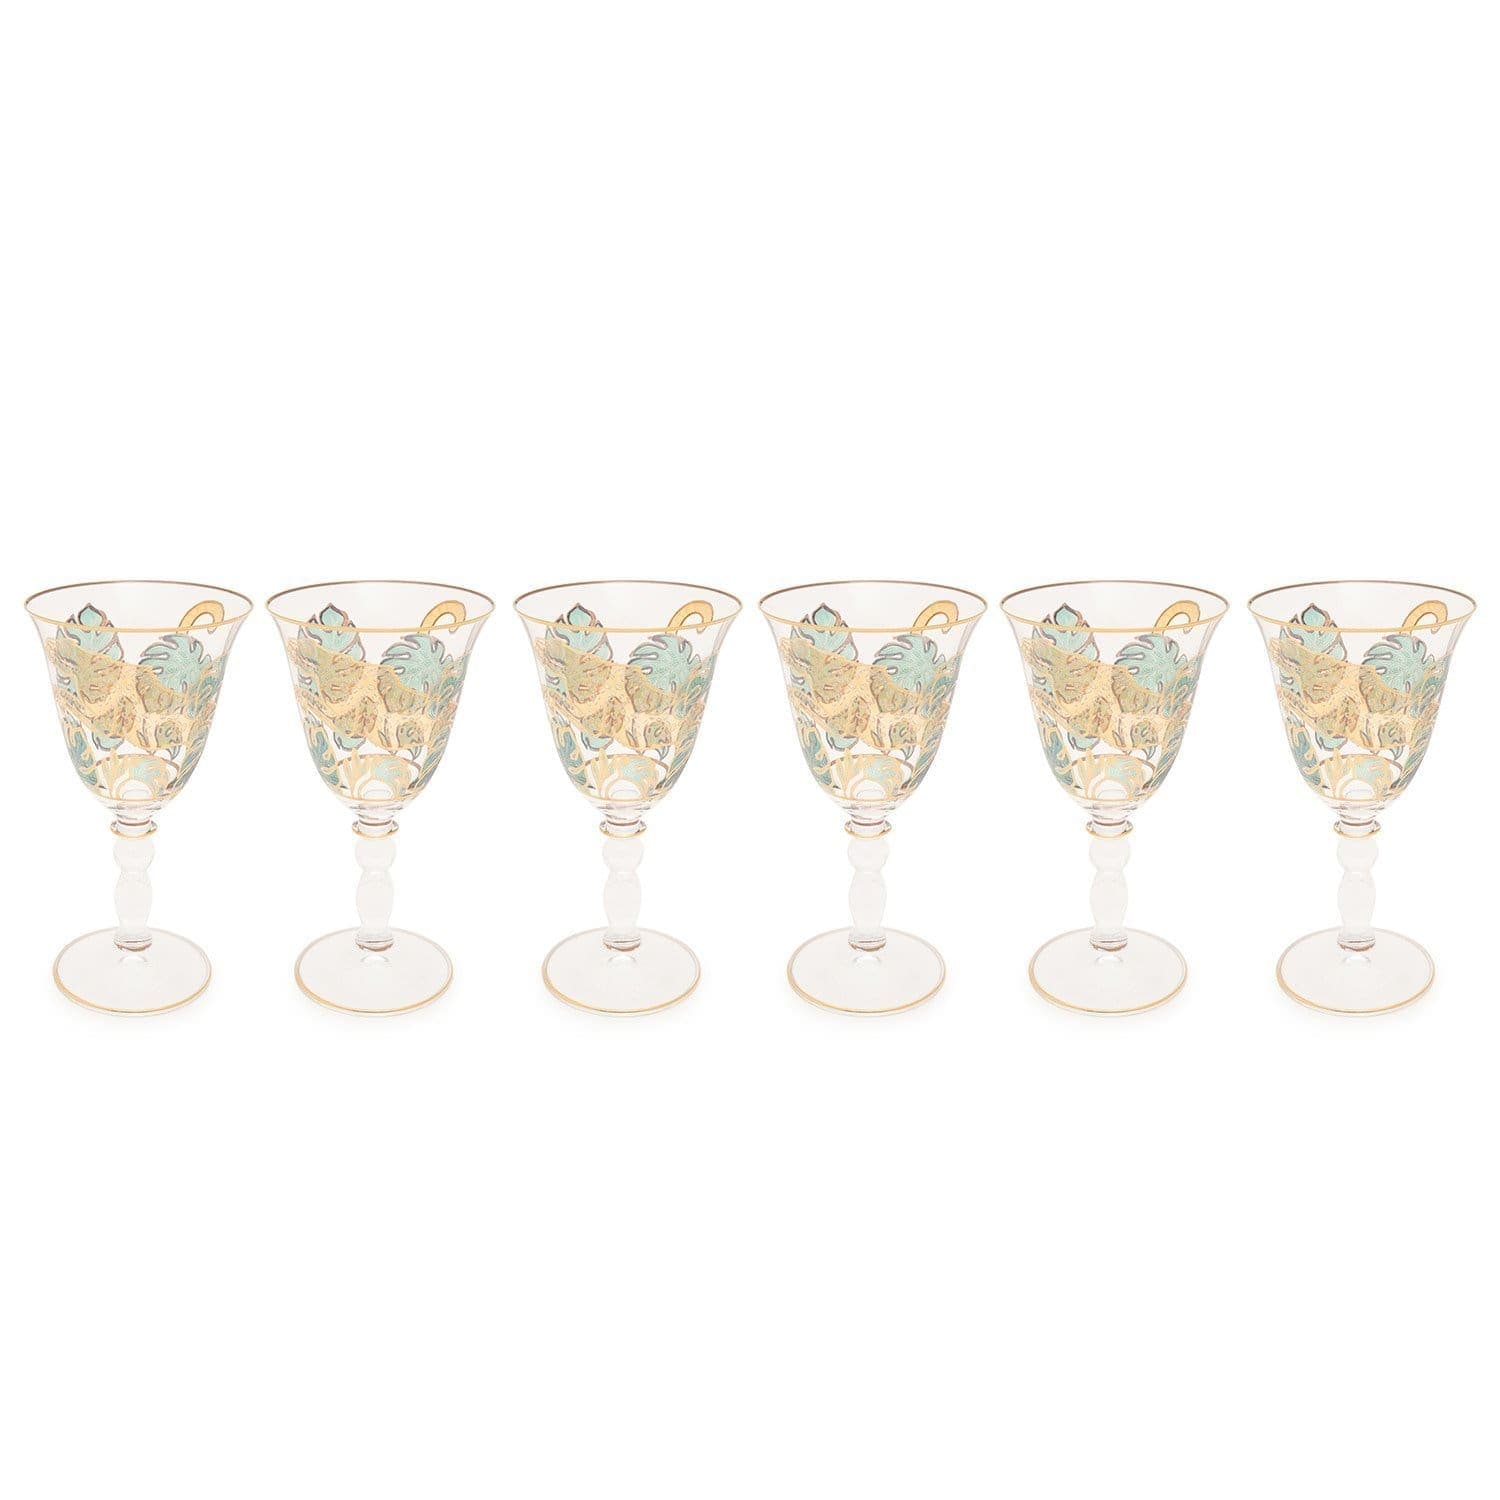 Combi Latisha Goblet Set - Green and Gold, 260 ml, Large, 6 Piece - G748Z/96 - Jashanmal Home